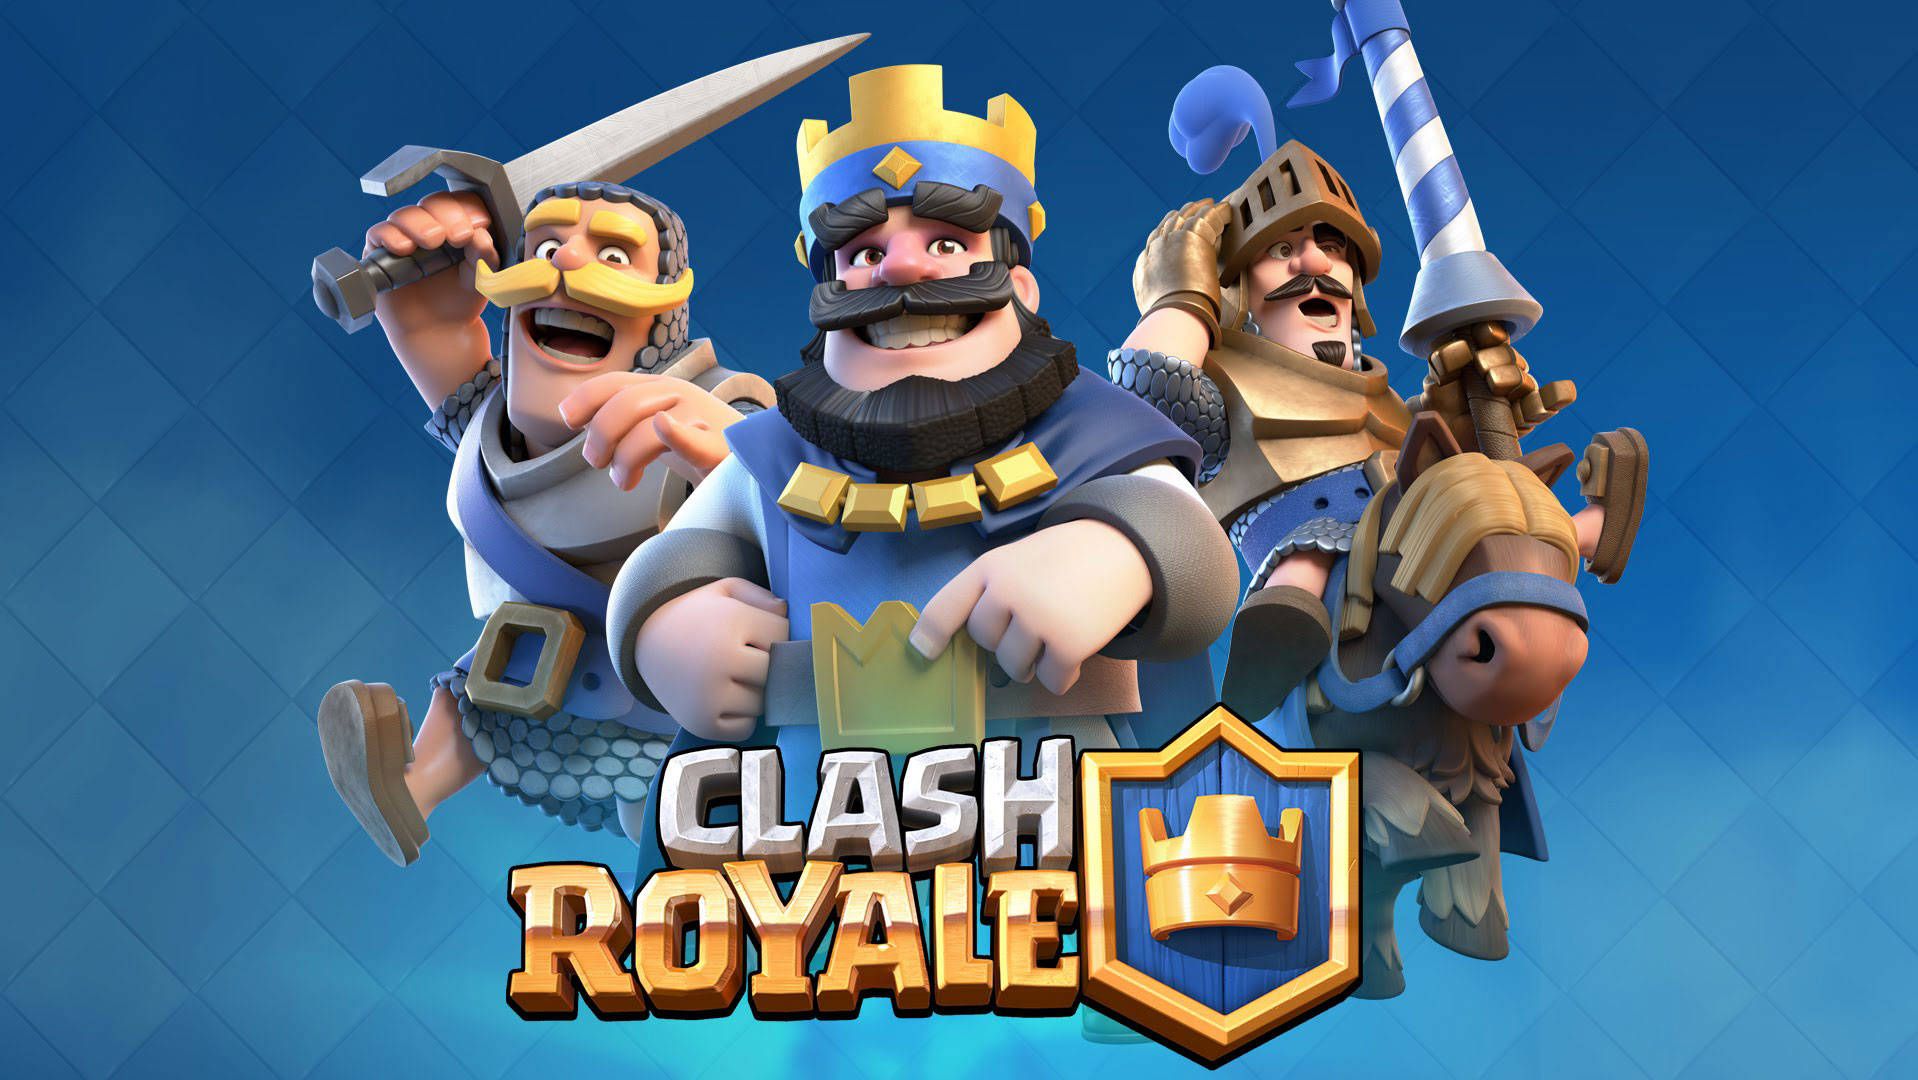 Celebs The Play Clash Royale 1